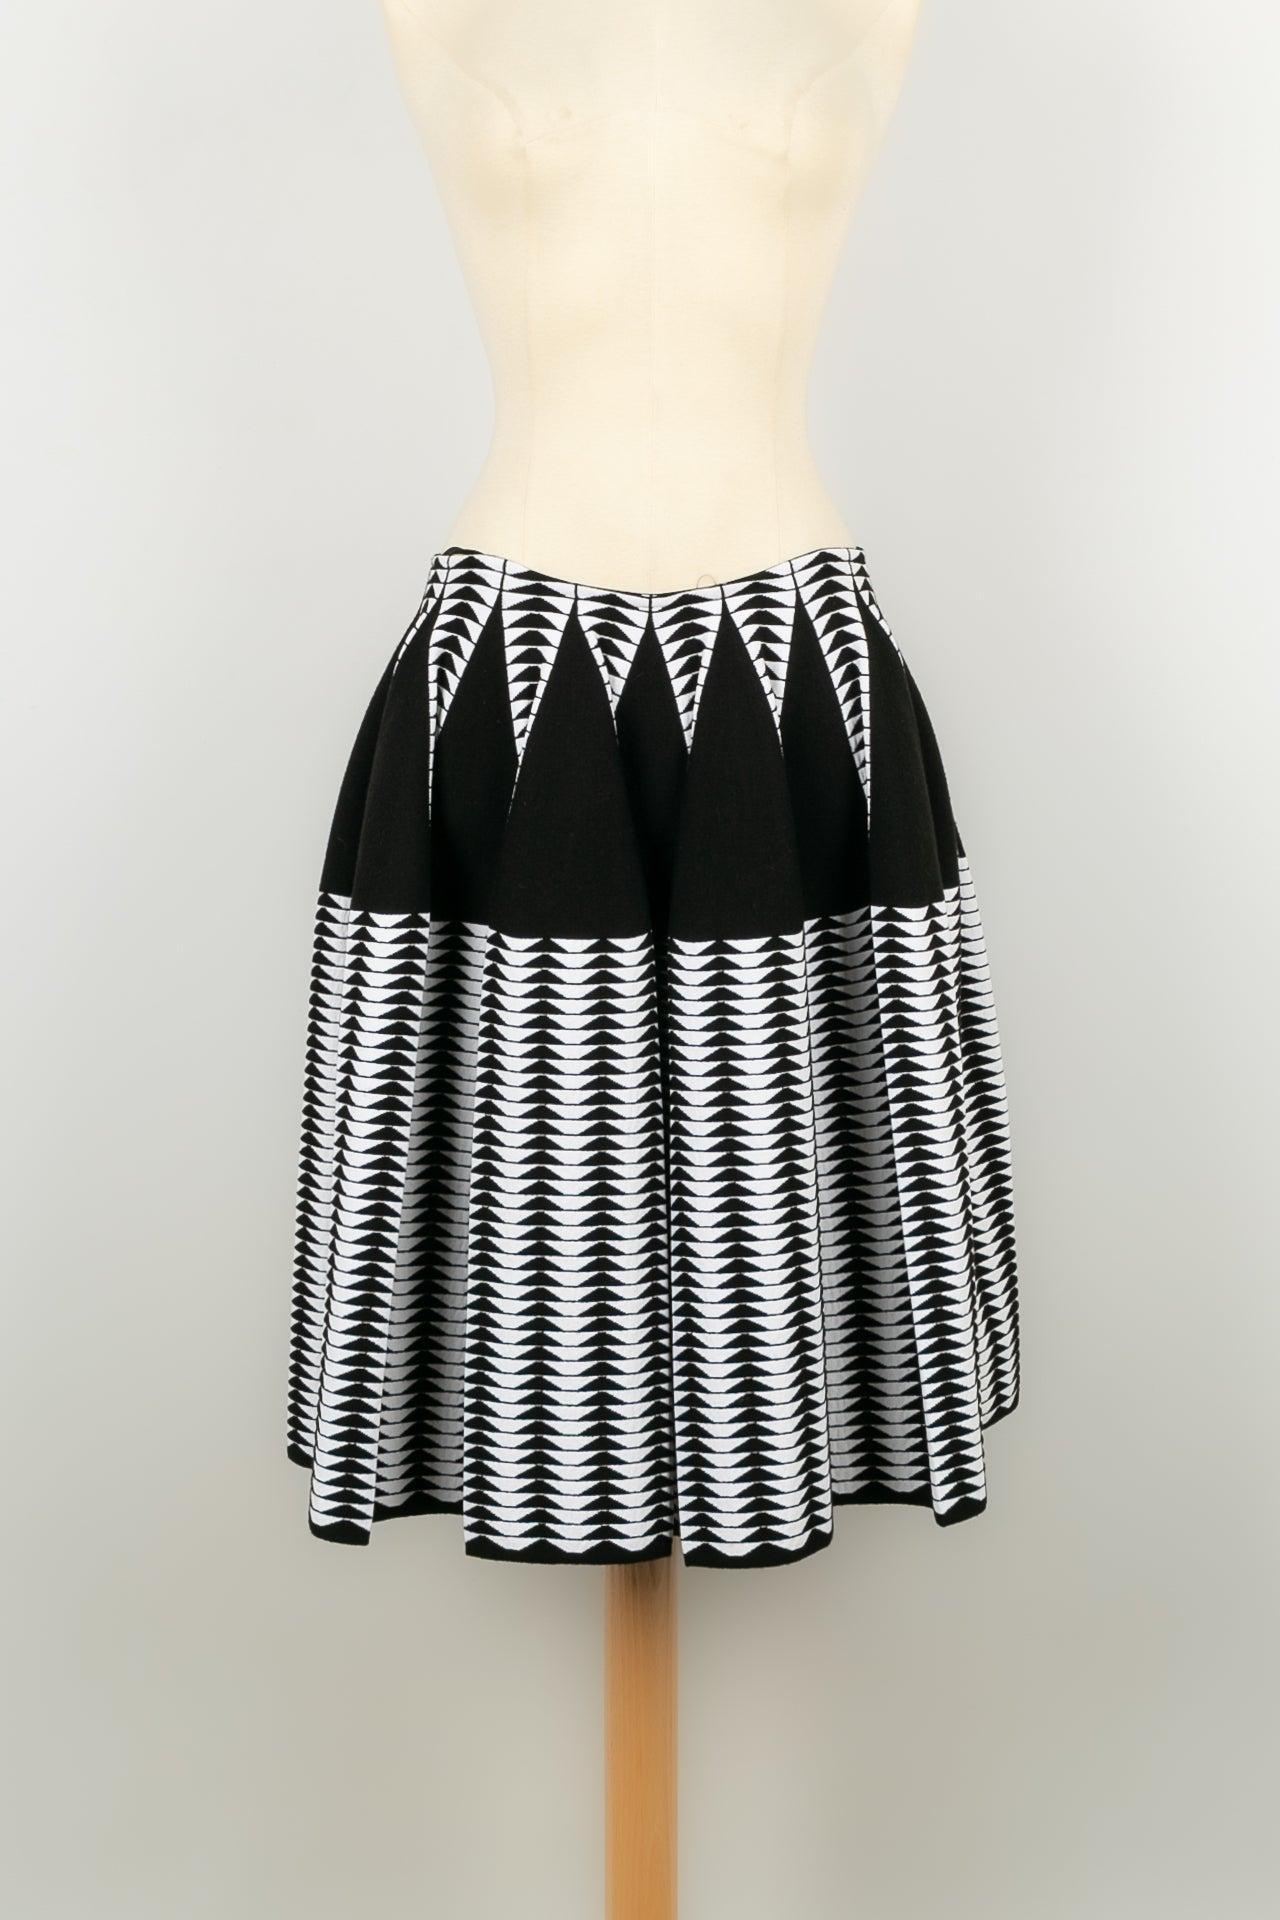 Women's Alaïa Set Composed of a Top and a Flared Skirt